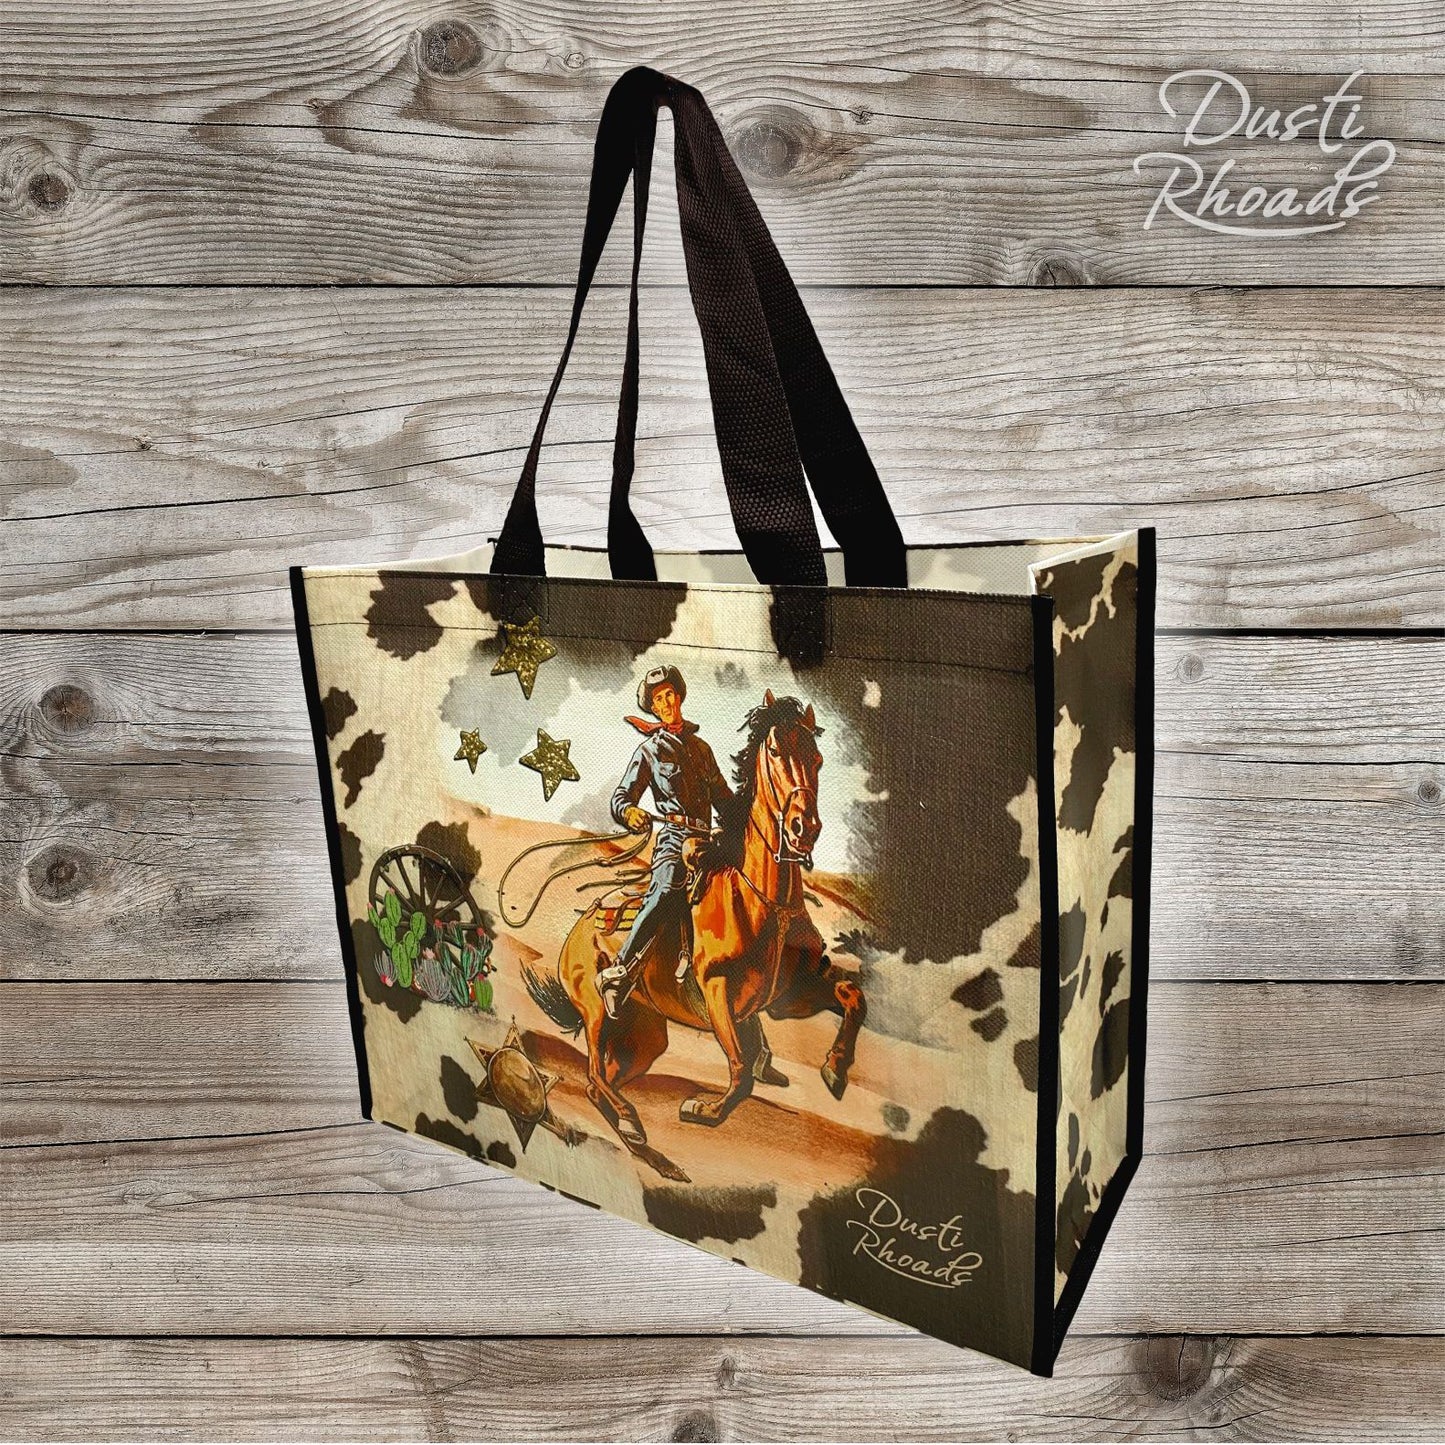 Shopping Bags (6 pack)